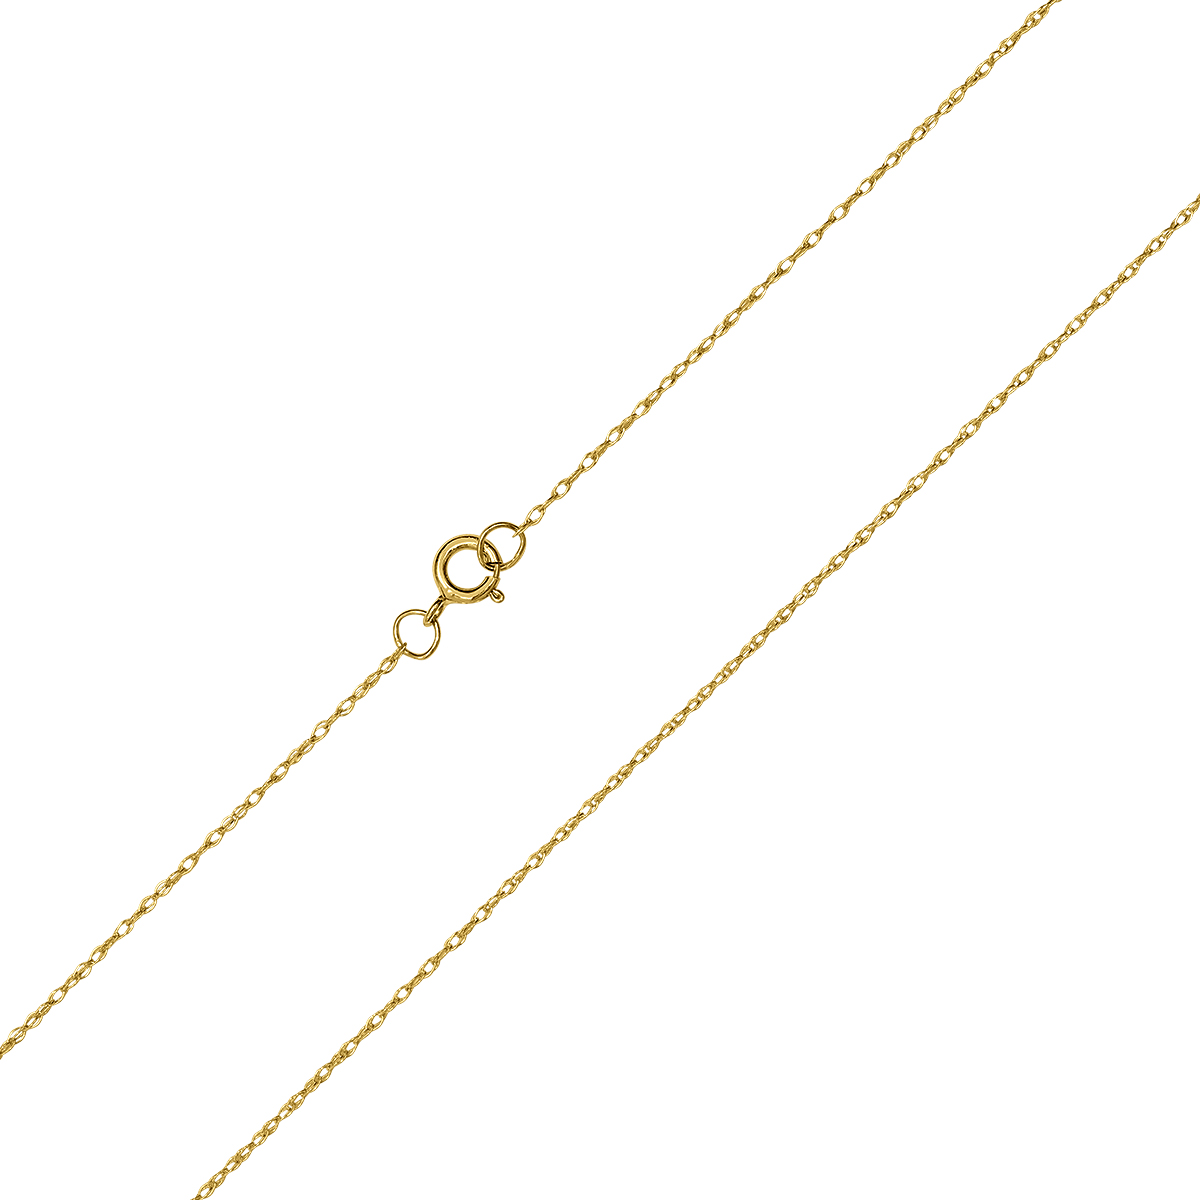 10K Yellow Gold .5MM Shiny Carded Rope Chain with Spring Ring Clasp - 16 Inch